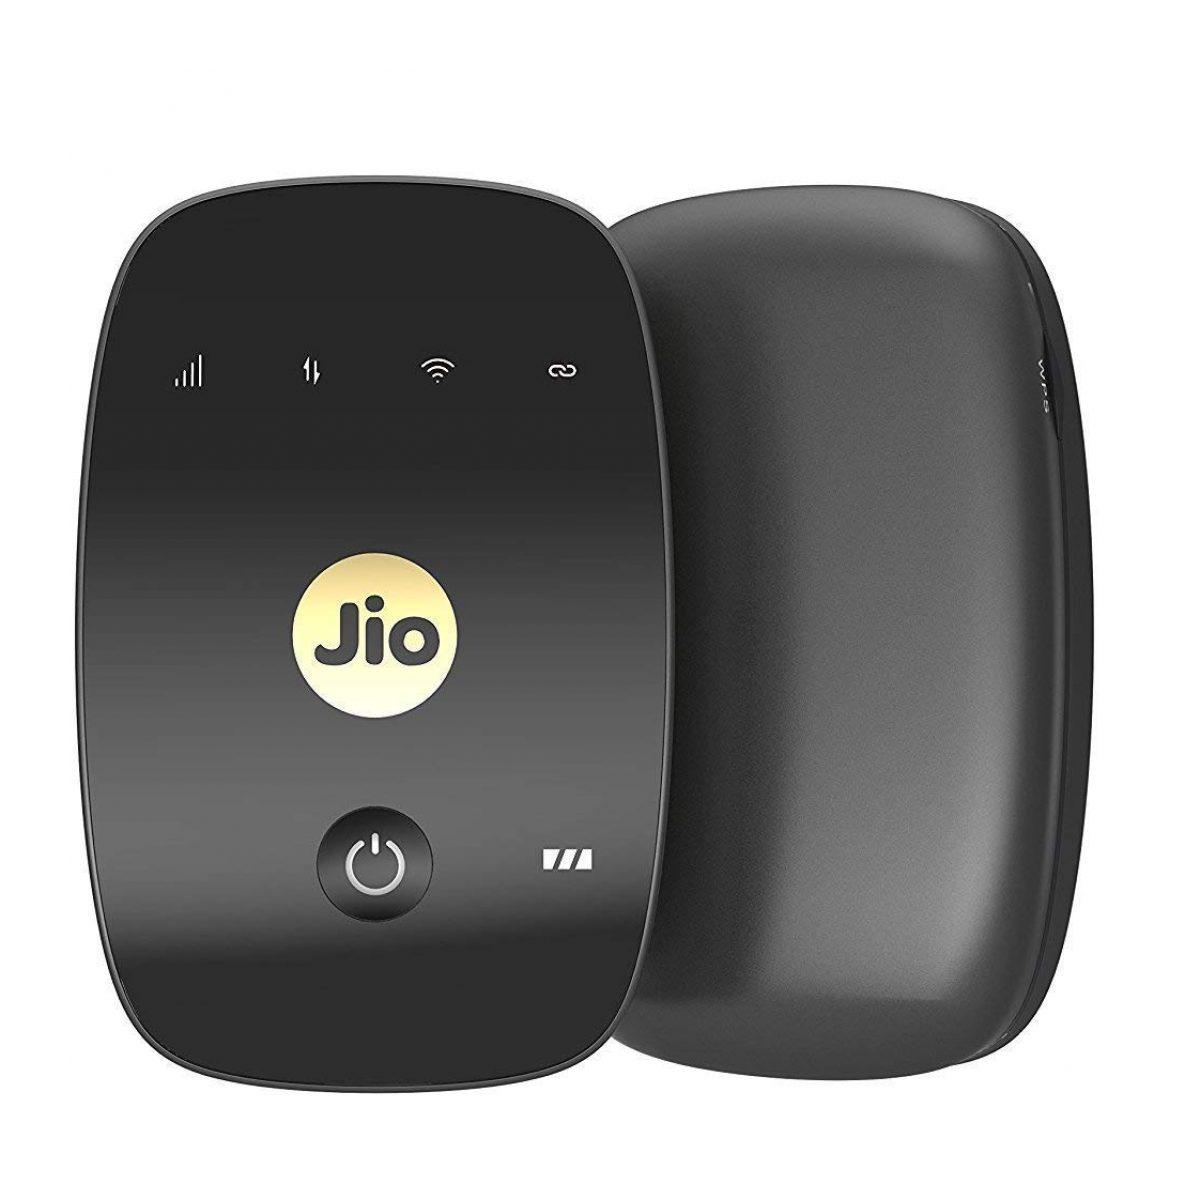 Online Recharging: Step-by-Step Guide For Recharging Your Jio Dongle